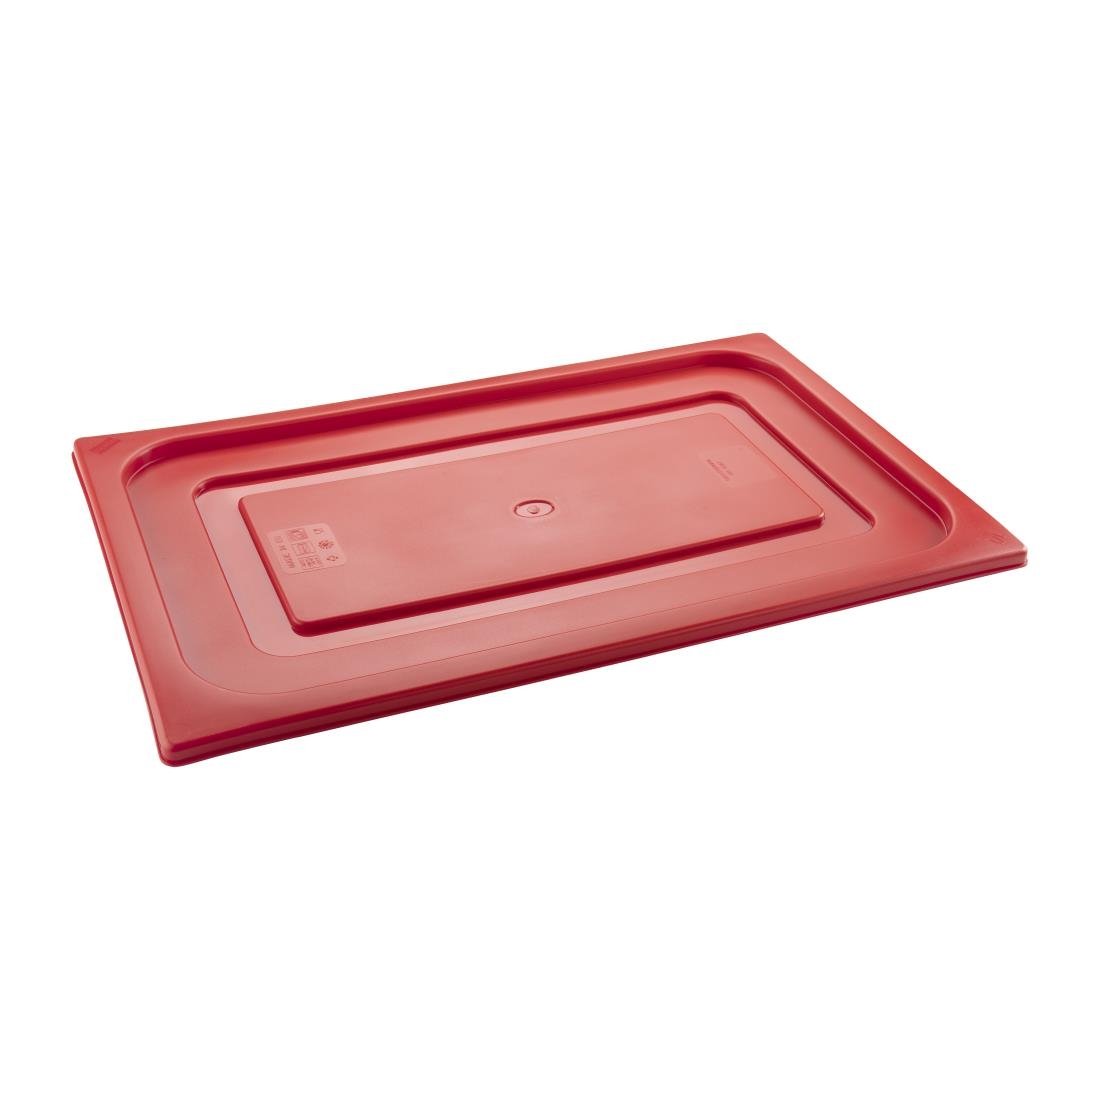 HT890 Pujadas Red Polinorm Gastronorm Lid 1/3GN